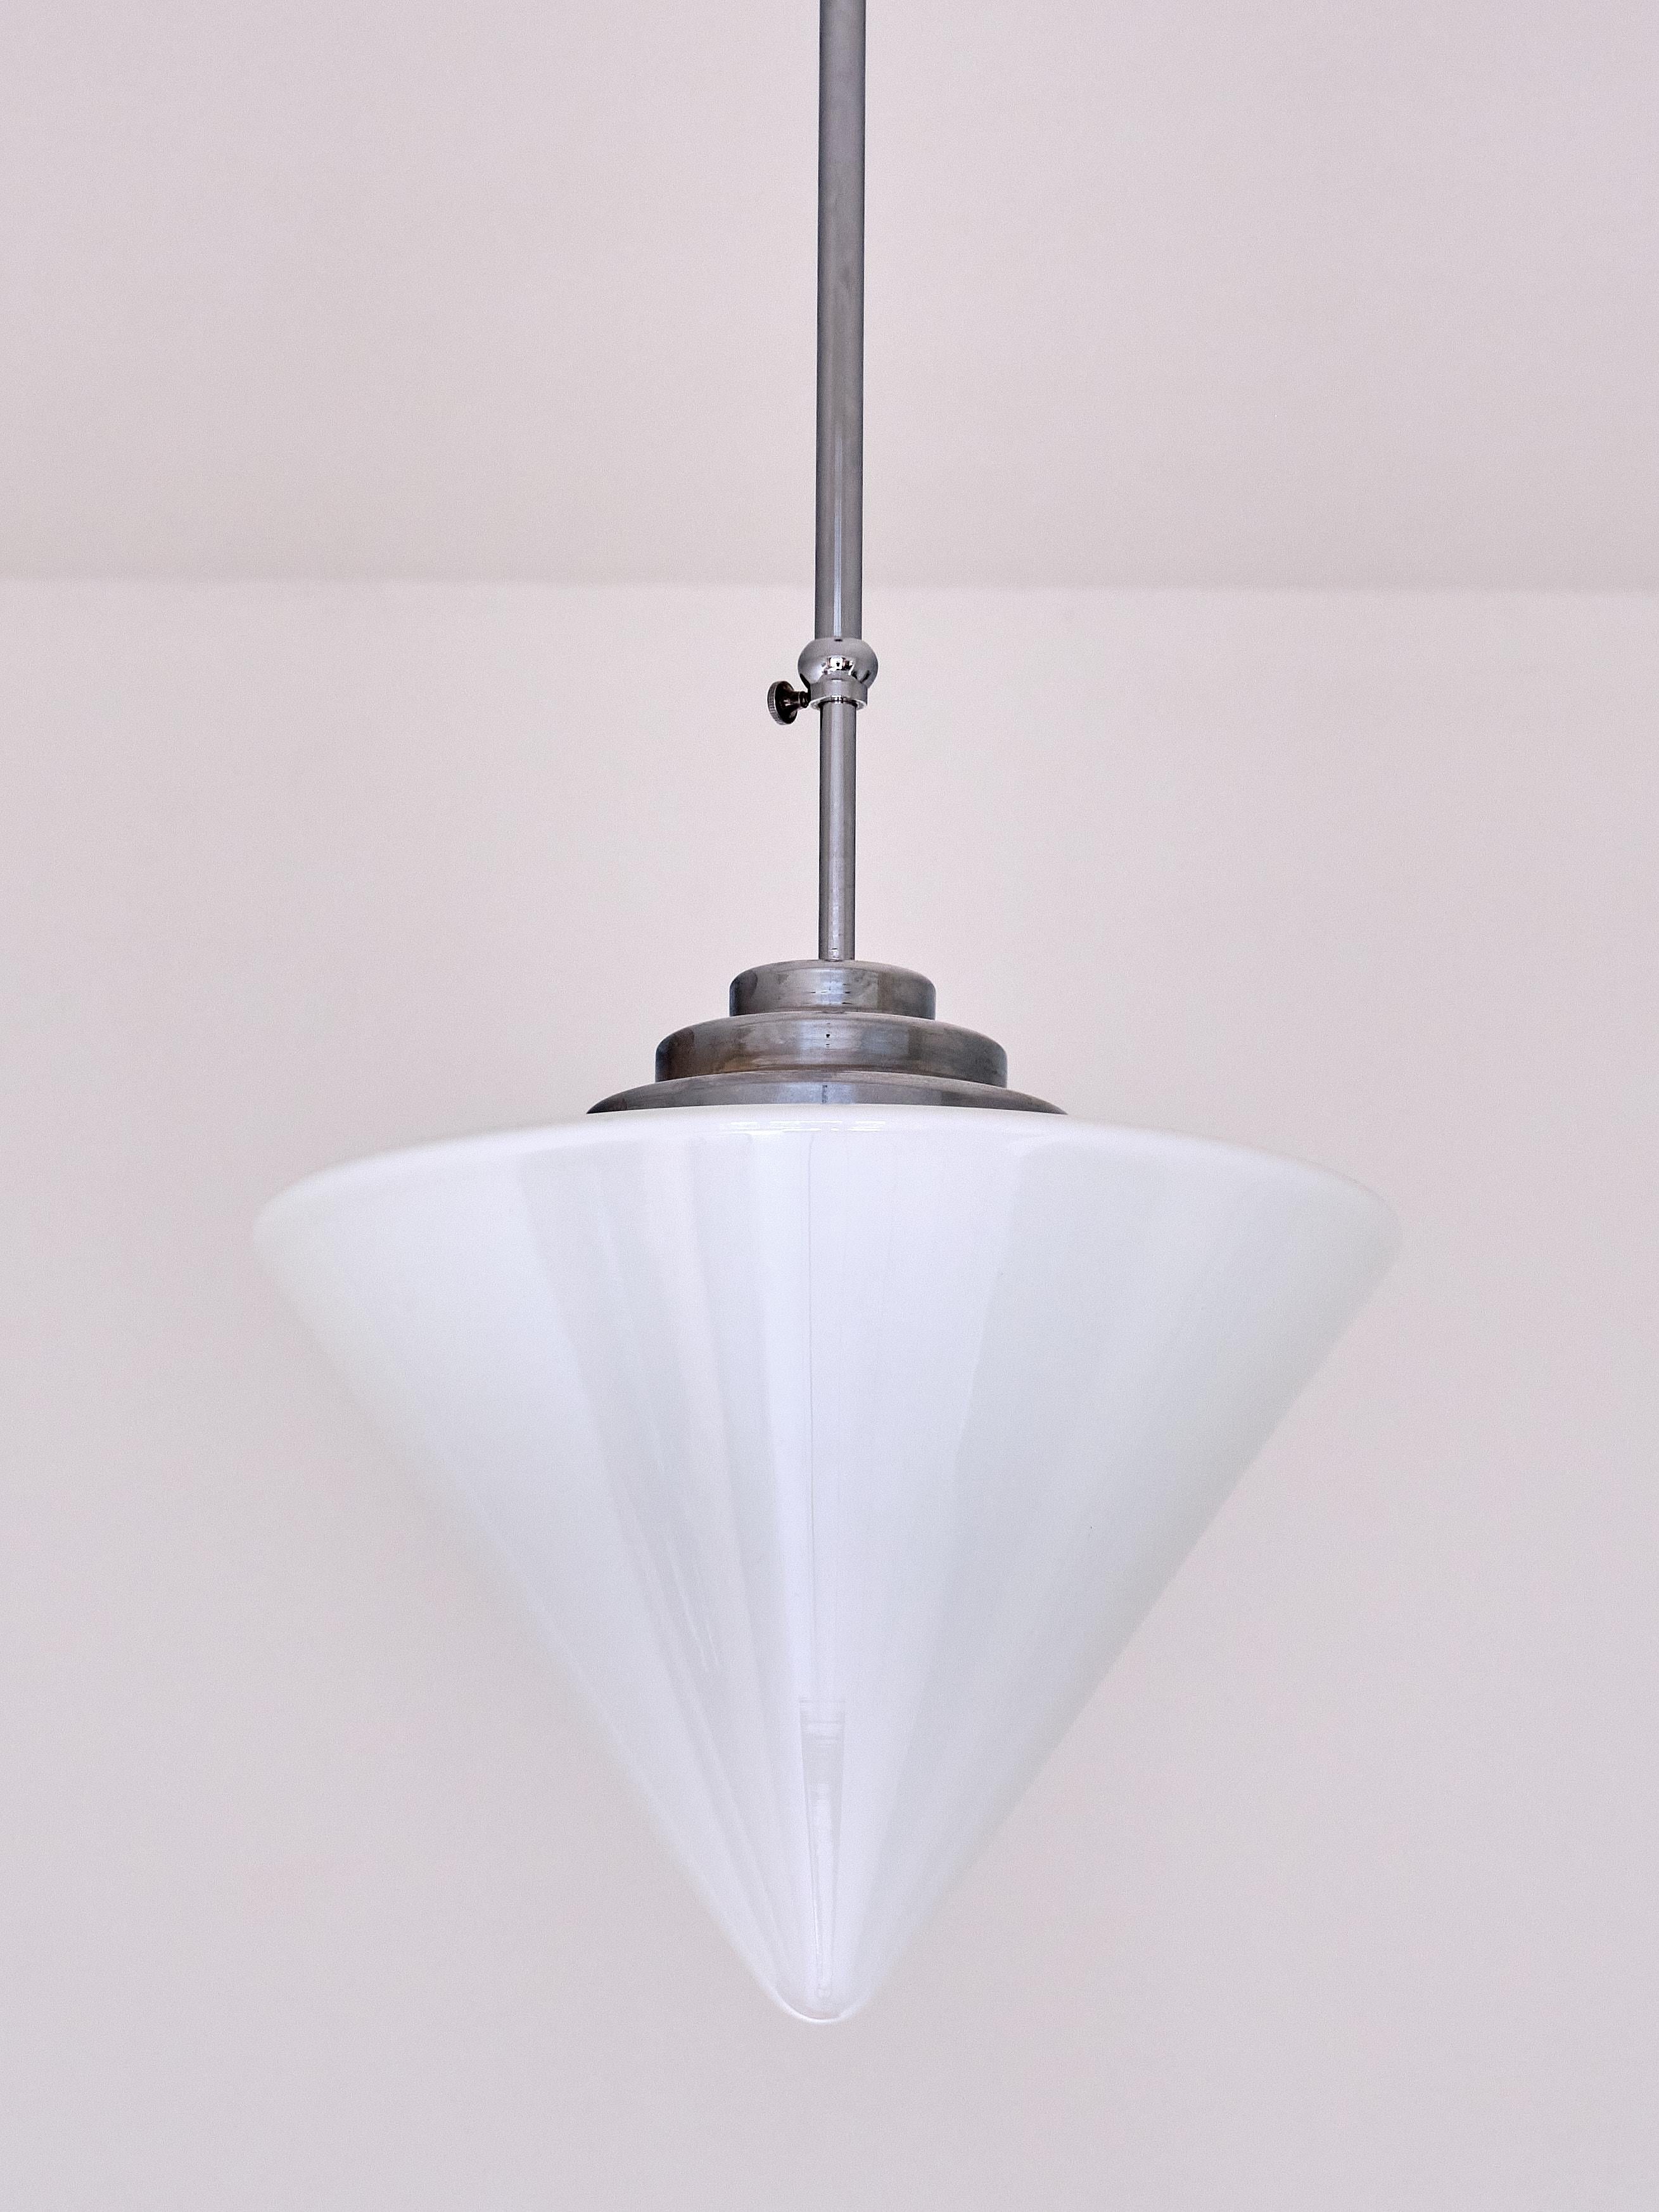 Art Deco Gispen Cone Shaped Pendant Light with Adjustable Drop Height, Netherlands, 1950s For Sale